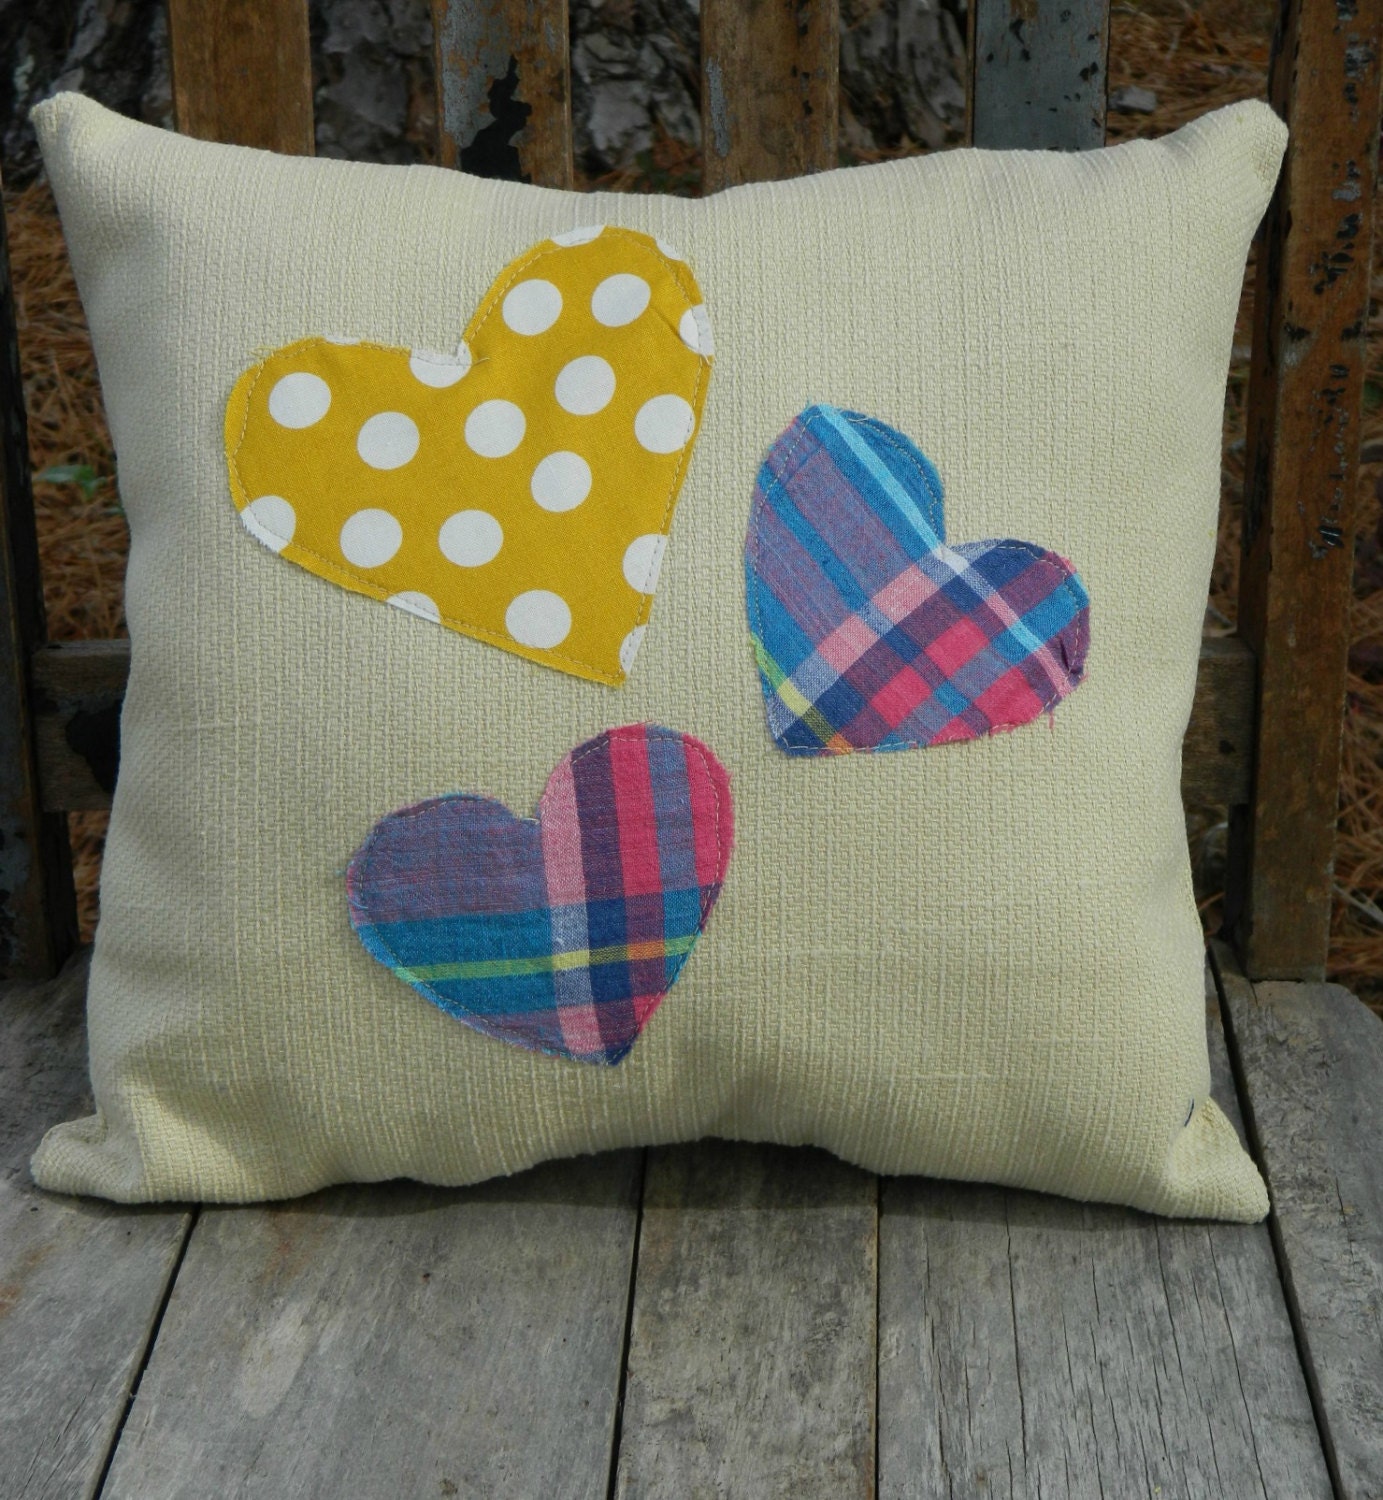 Happy Heart Triple Heart Pink, Blue, and Yellow on Tan Fabric Pillow